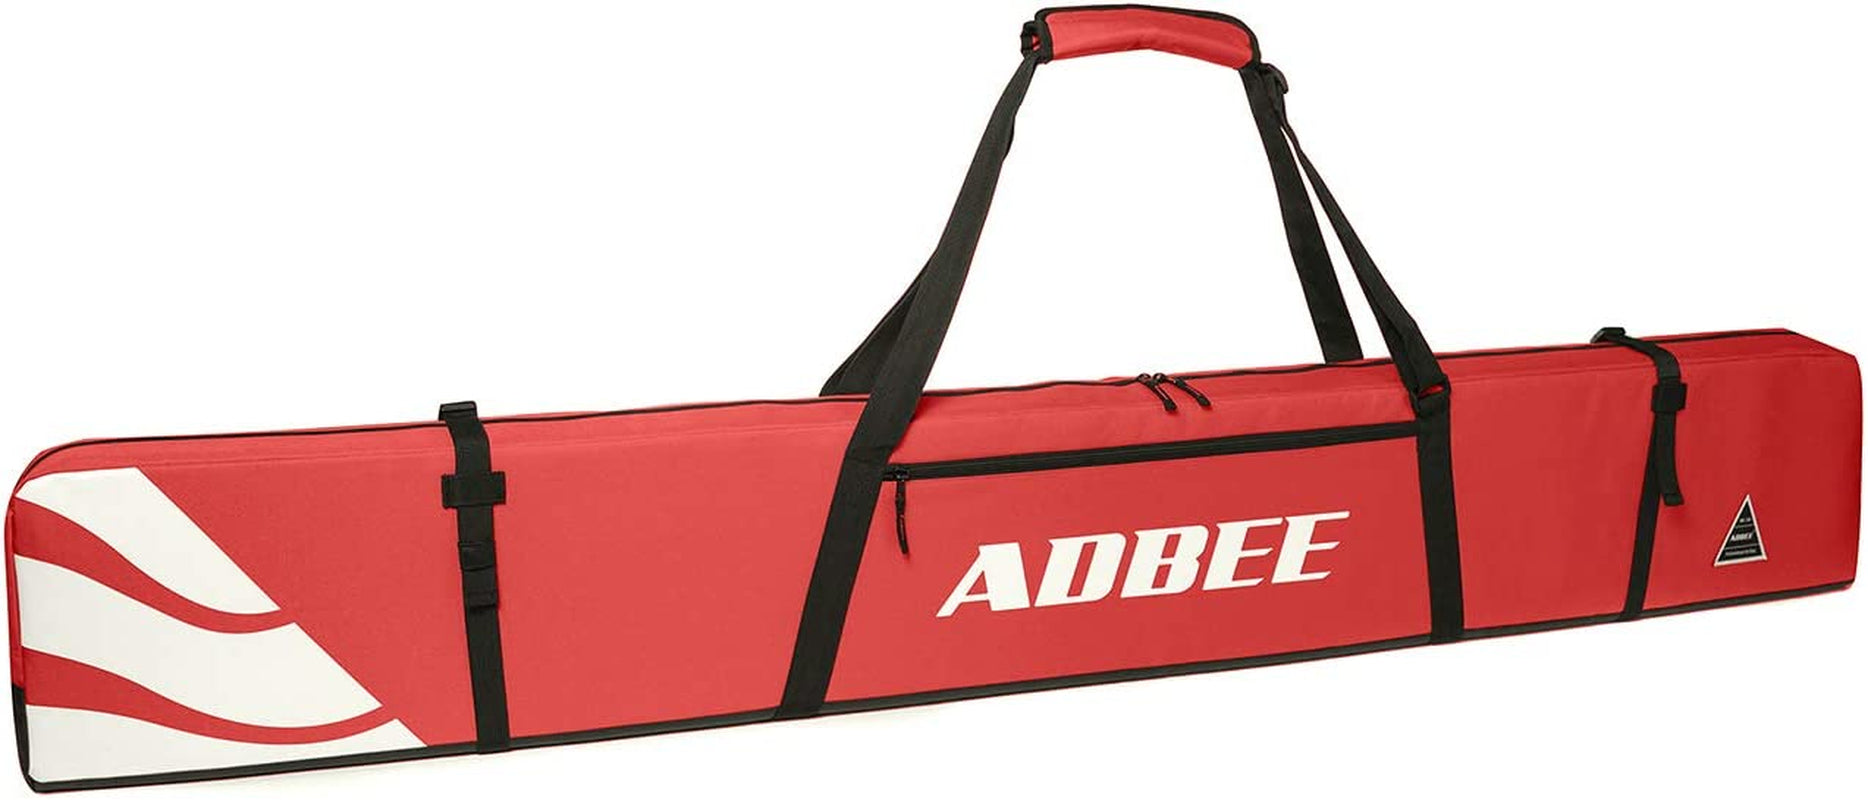 ADBEE Ski Bag – Padded Ski Bag with Durable Handle – Waterproof Fully Padded Ski Strap Carrier – Reliable 600D Oxford Fabric – Heavy-Duty Zippers and Buckles